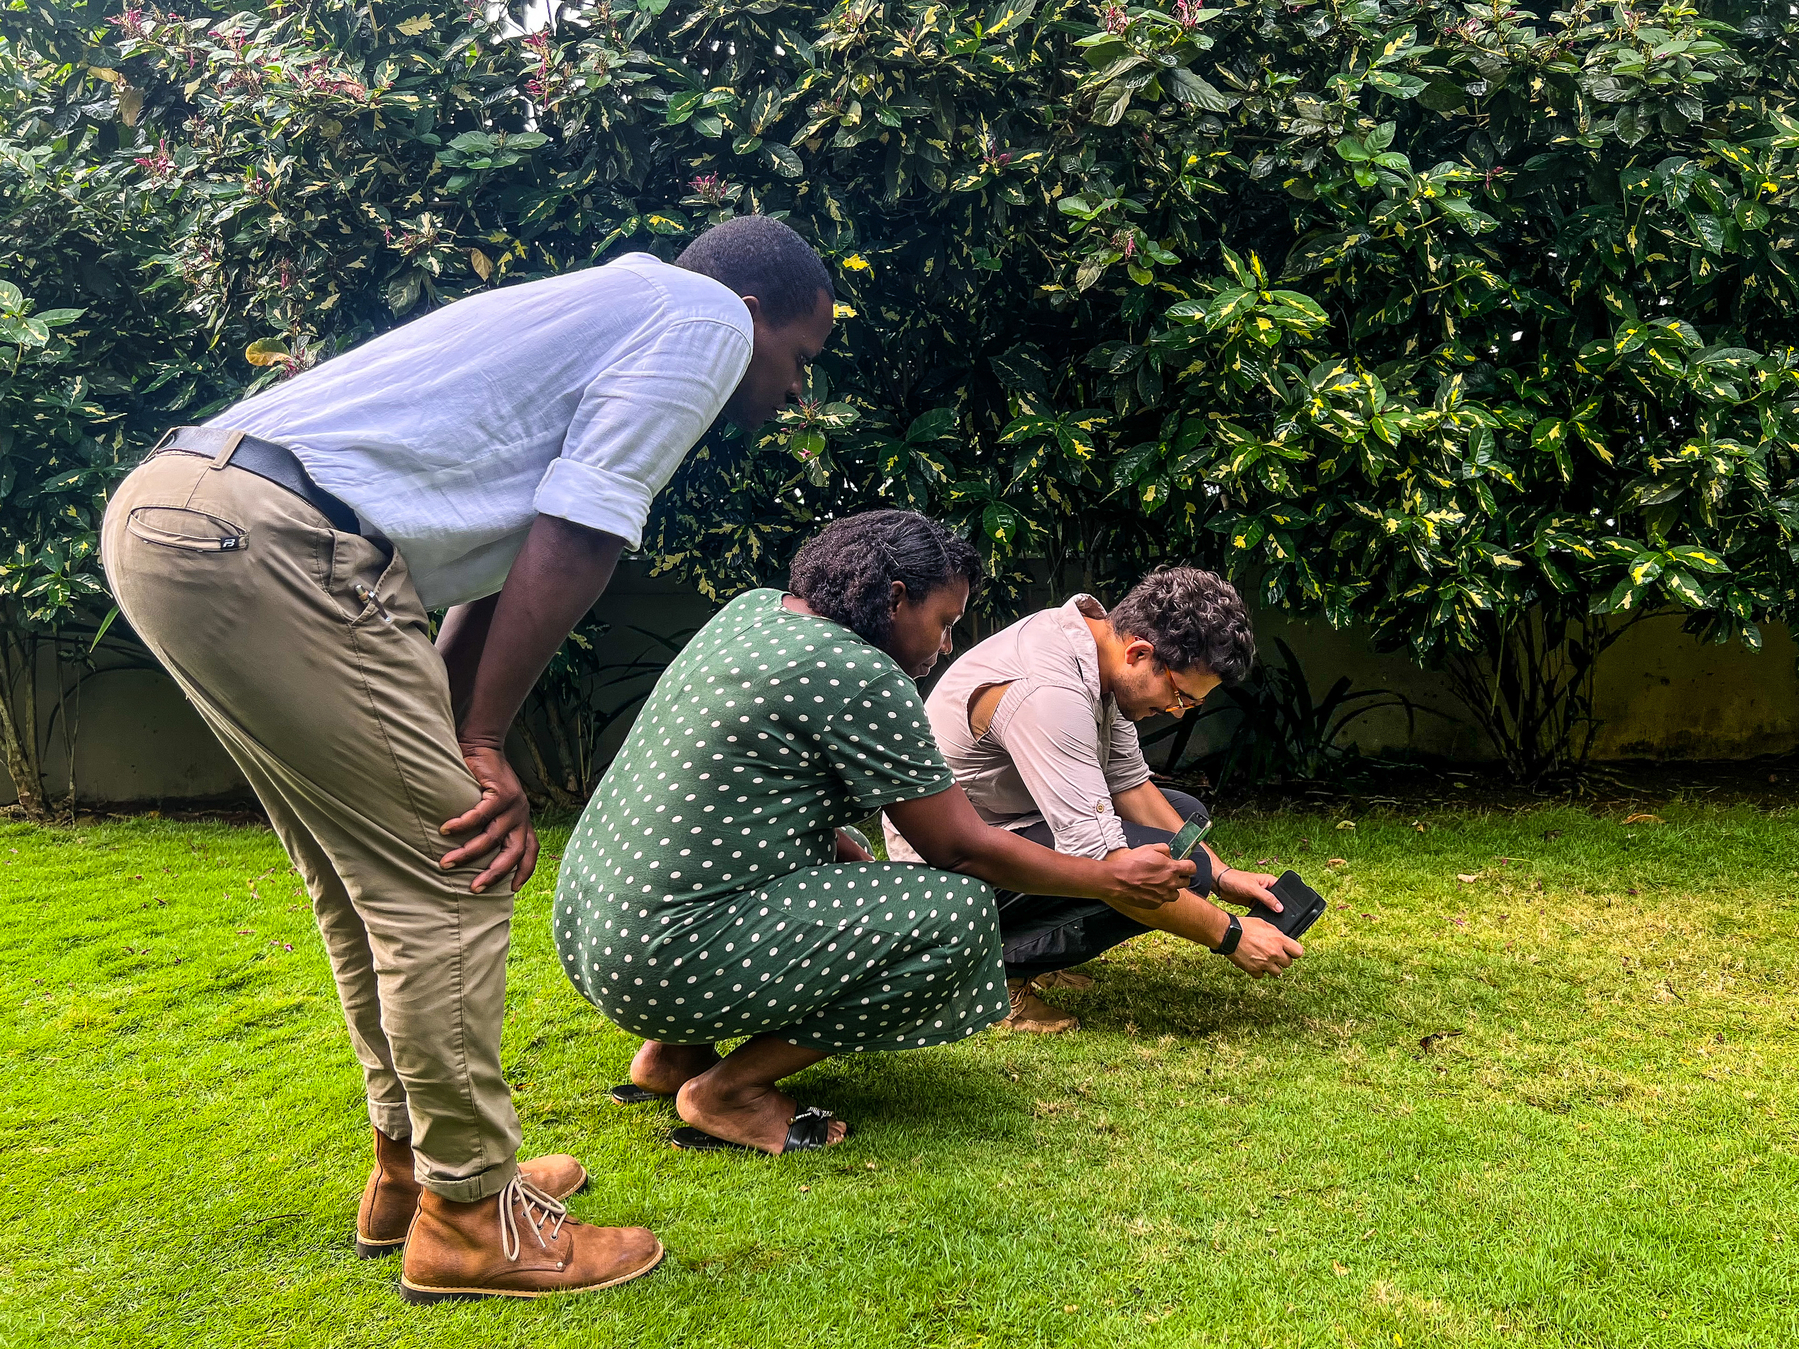 Three people try to photograph something small in a lawn. 